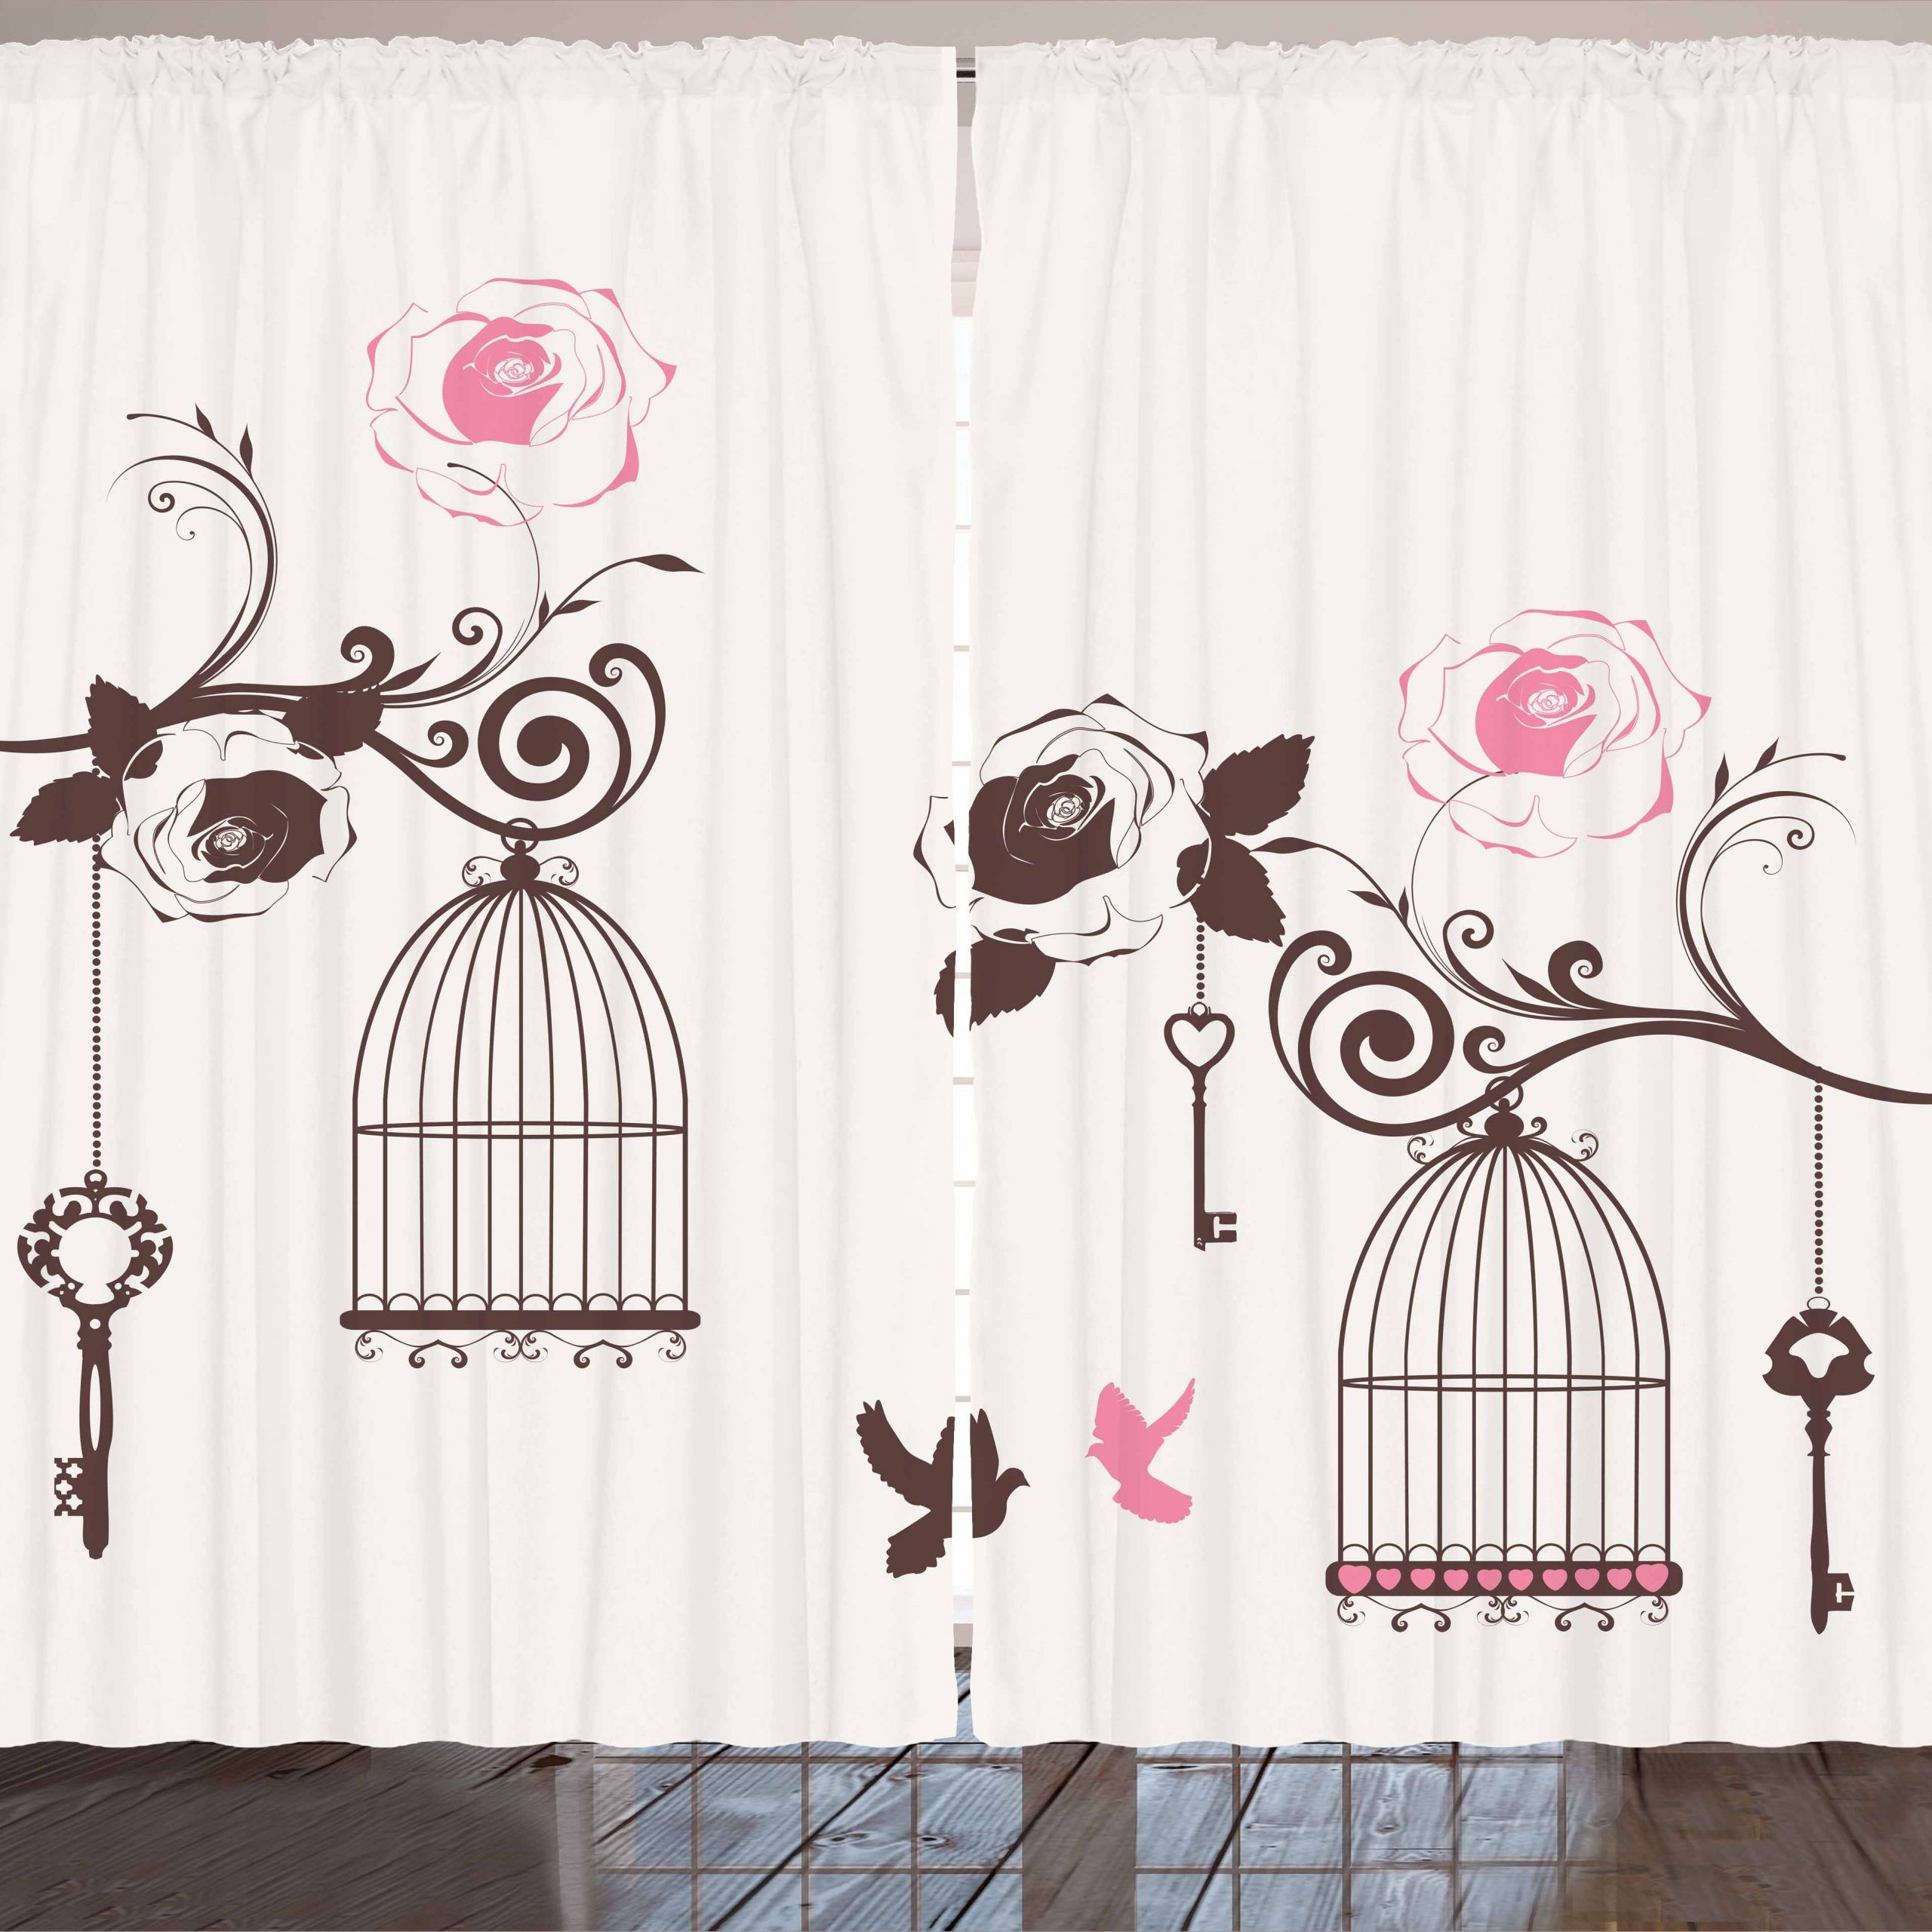 Vintage Curtains 2 Panels Set, Bird Cages And Keys Hanging From Swirling  Rose Branches Doves, Window Drapes For Living Room Bedroom, 108w X 90l Pertaining To Vintage Sea Shore All Over Printed Window Curtains (View 16 of 20)